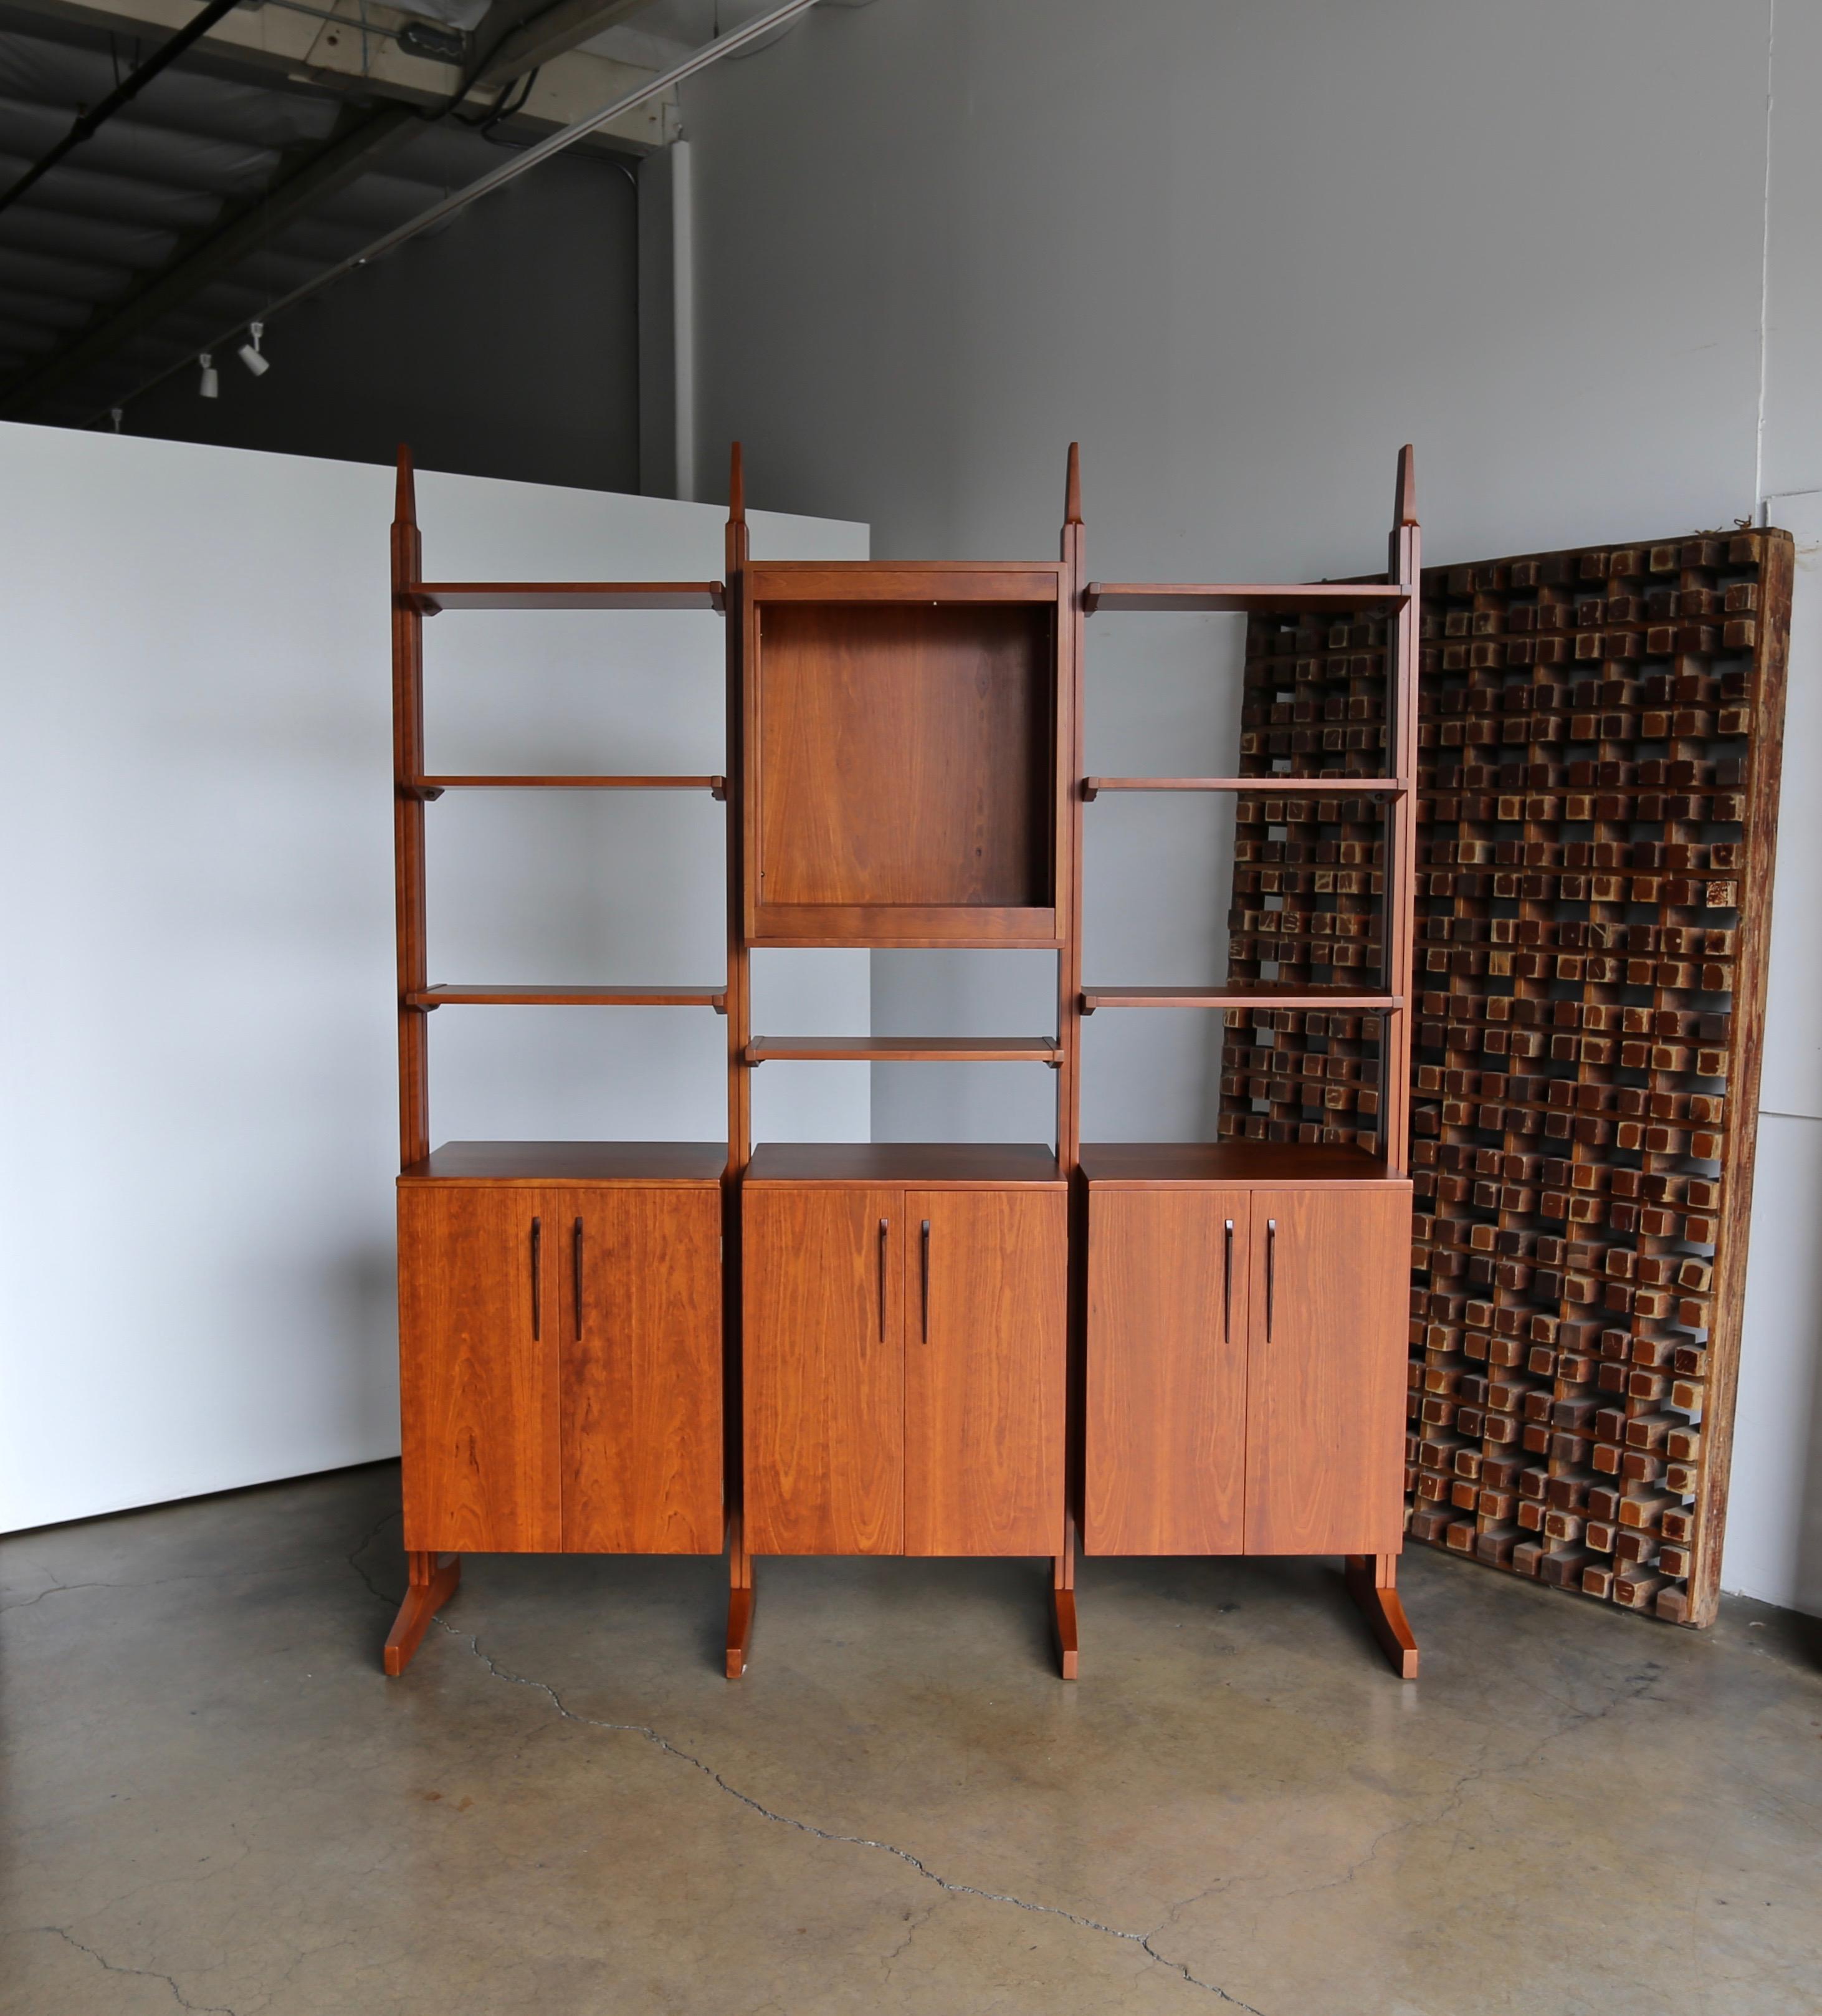 Handcrafted freestanding wall unit / room divider by California Modern Craftsman William Ketelle. Signed 